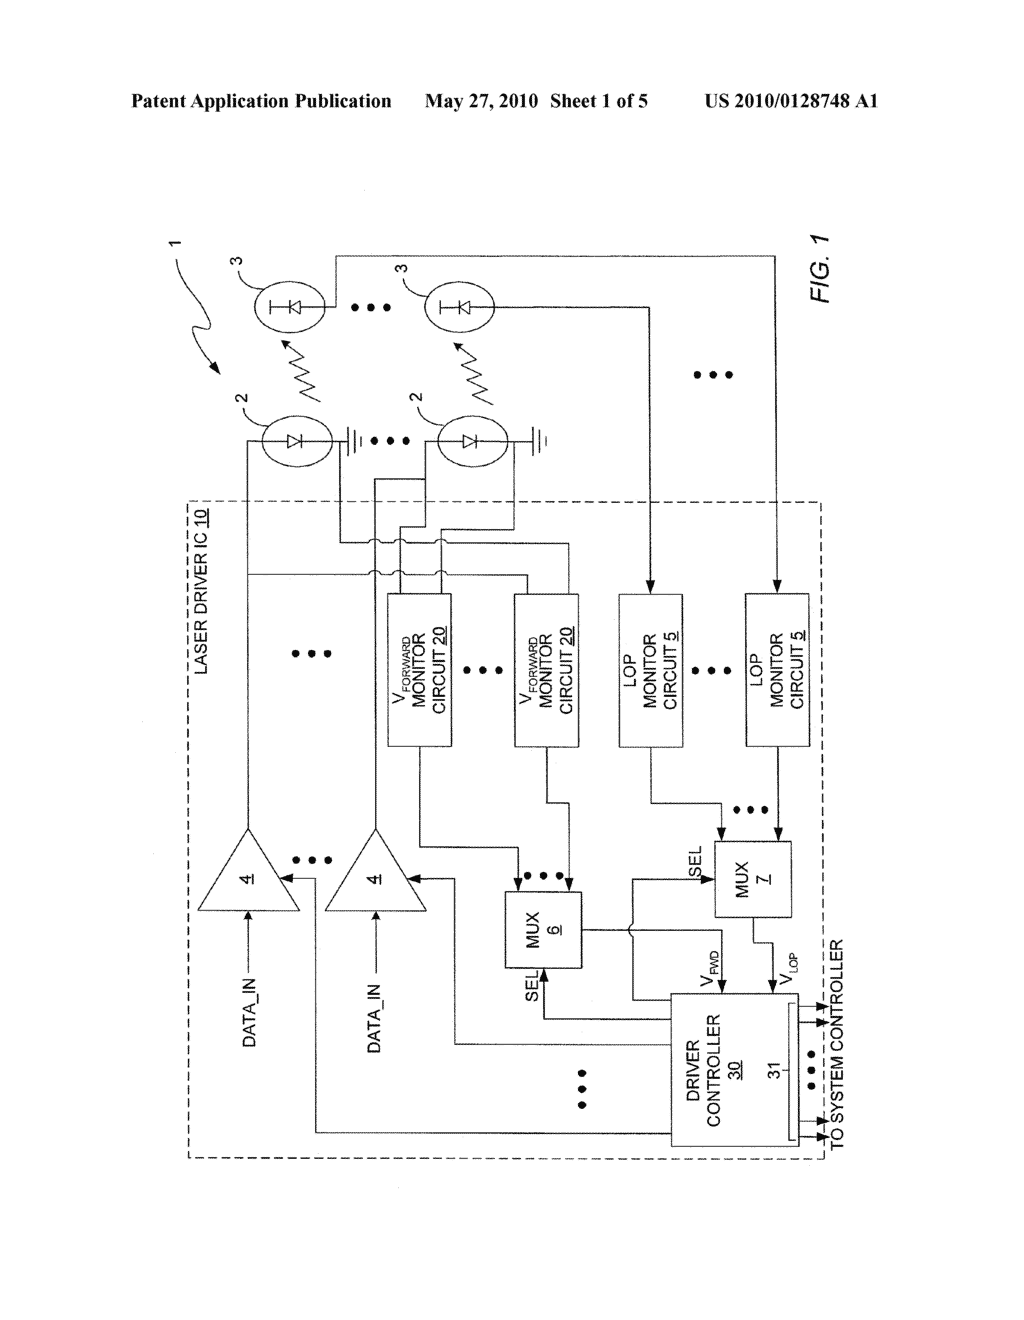 MONITORING METHOD AND DEVICE FOR MONITORING A FORWARD VOLTAGE OF A LASER DIODE IN A LASER DIODE DRIVER INTEGRATED CIRCUIT (IC) - diagram, schematic, and image 02